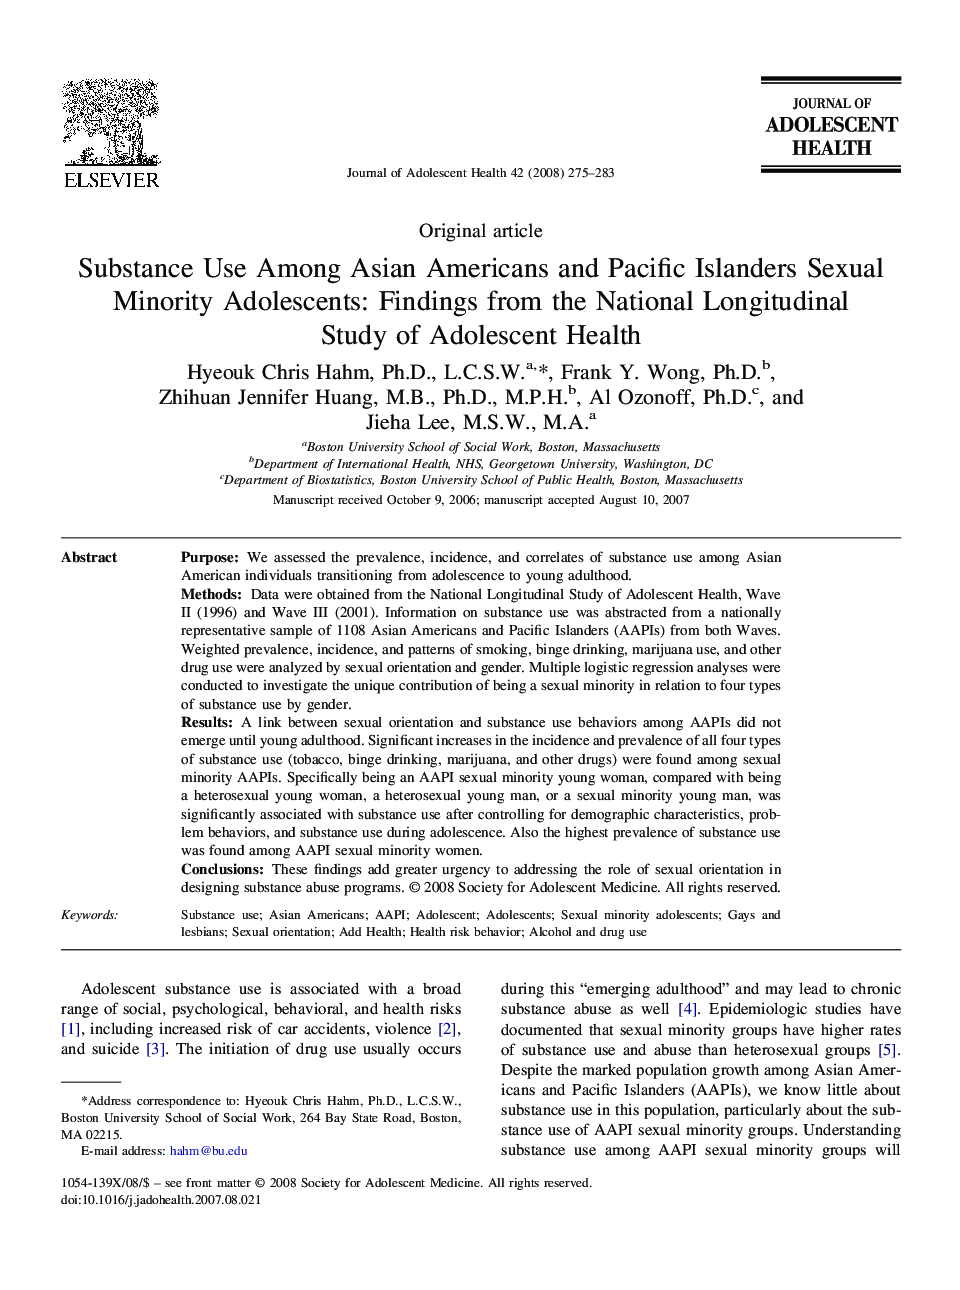 Substance Use Among Asian Americans and Pacific Islanders Sexual Minority Adolescents: Findings from the National Longitudinal Study of Adolescent Health